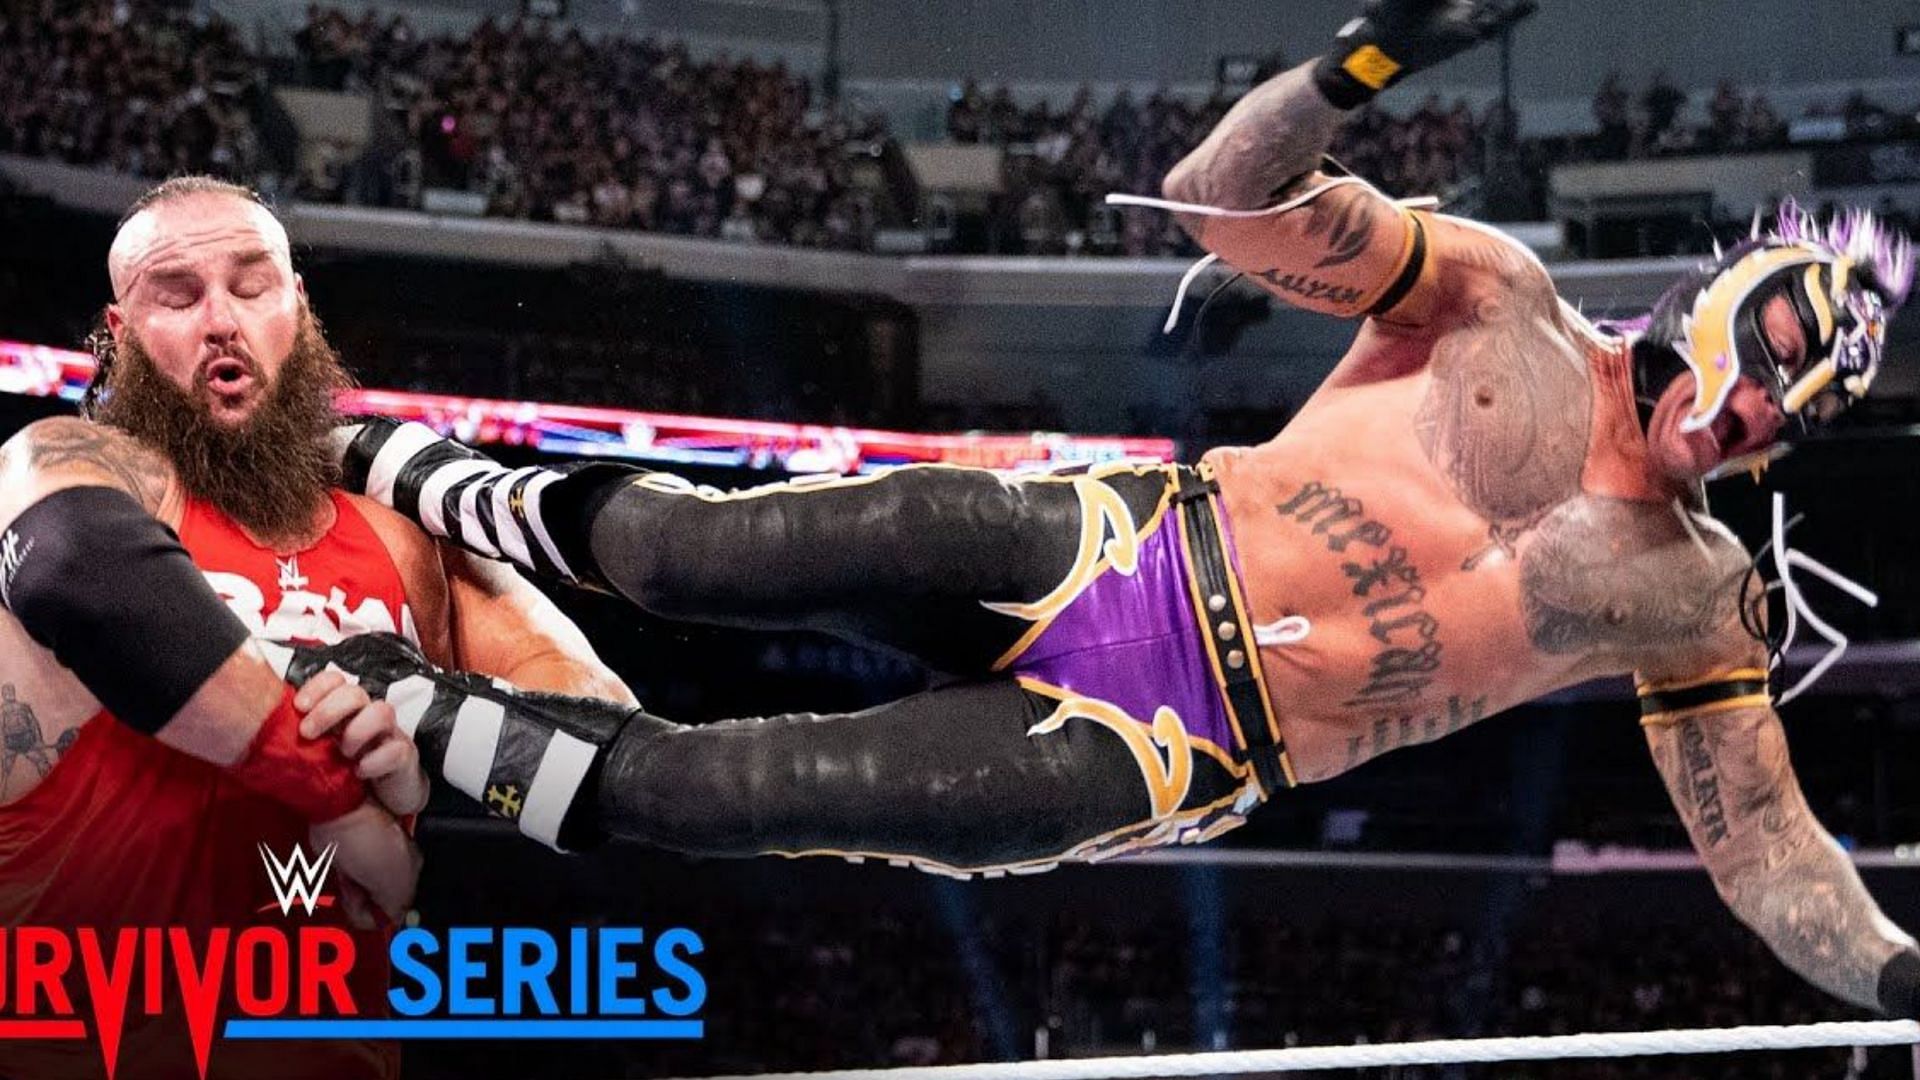 Rey Mysterio never faced Braun Strowman one-on-one